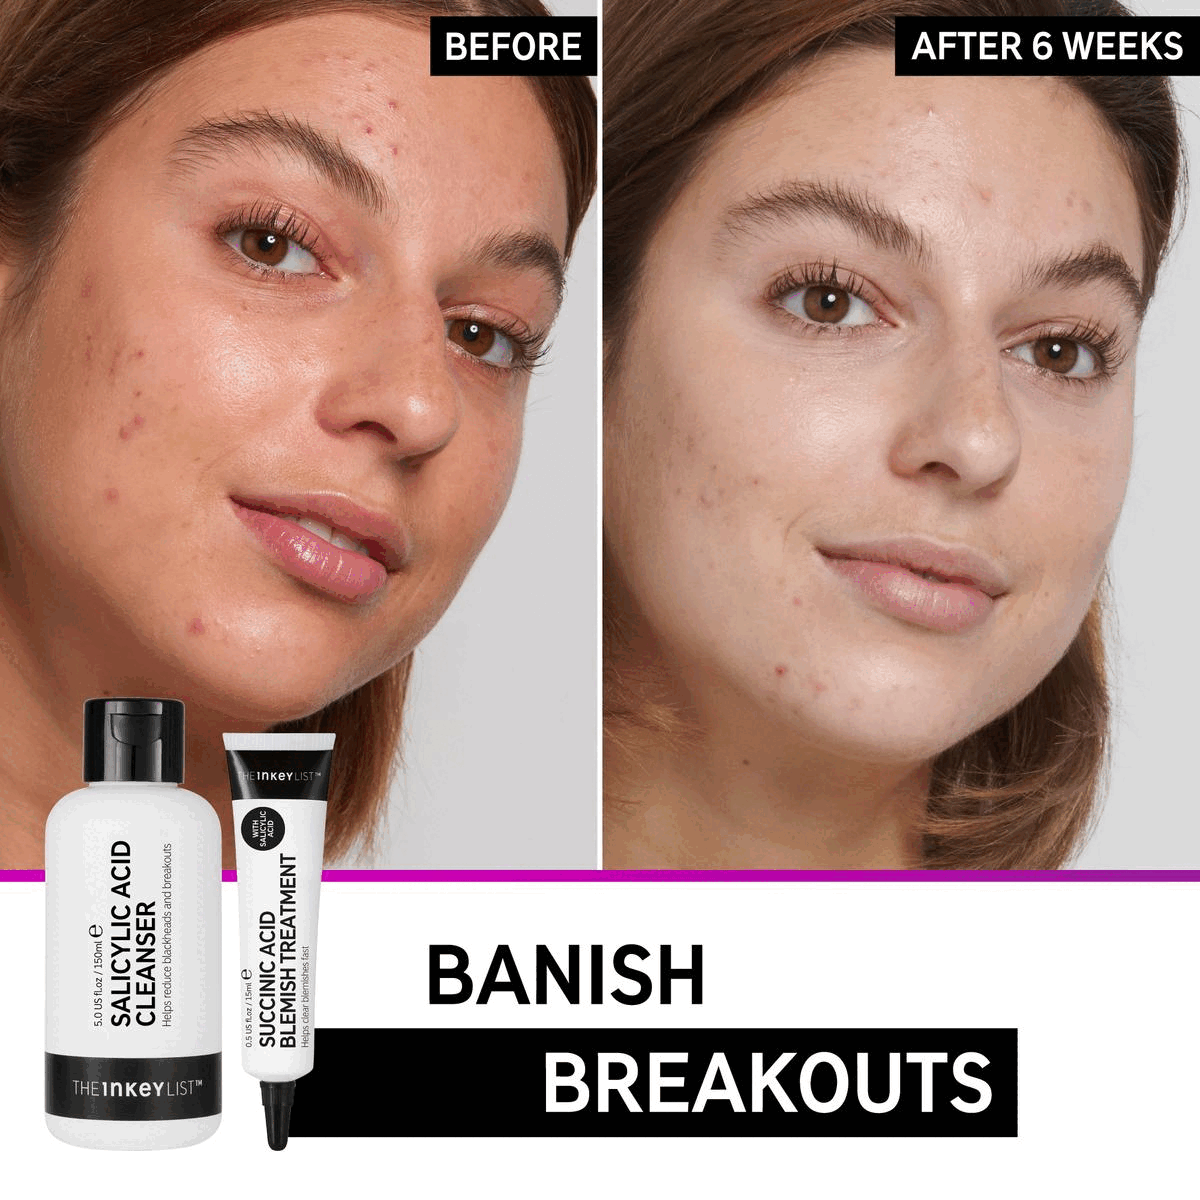 Image 1, Before and After 6 weeks, Banish breakouts Image 2, Salicylic Acid Cleanser, Succinic Acid Treatment, Omega Water Cream Image 3, STEP 1 Remove makeup and dirt, while helping to reduce blackheads and breakouts STEP 2 Clear blemishes fast, reduce inflammation and prevent clogged pores STEP 3 Immediately hydrate skin without oiliness